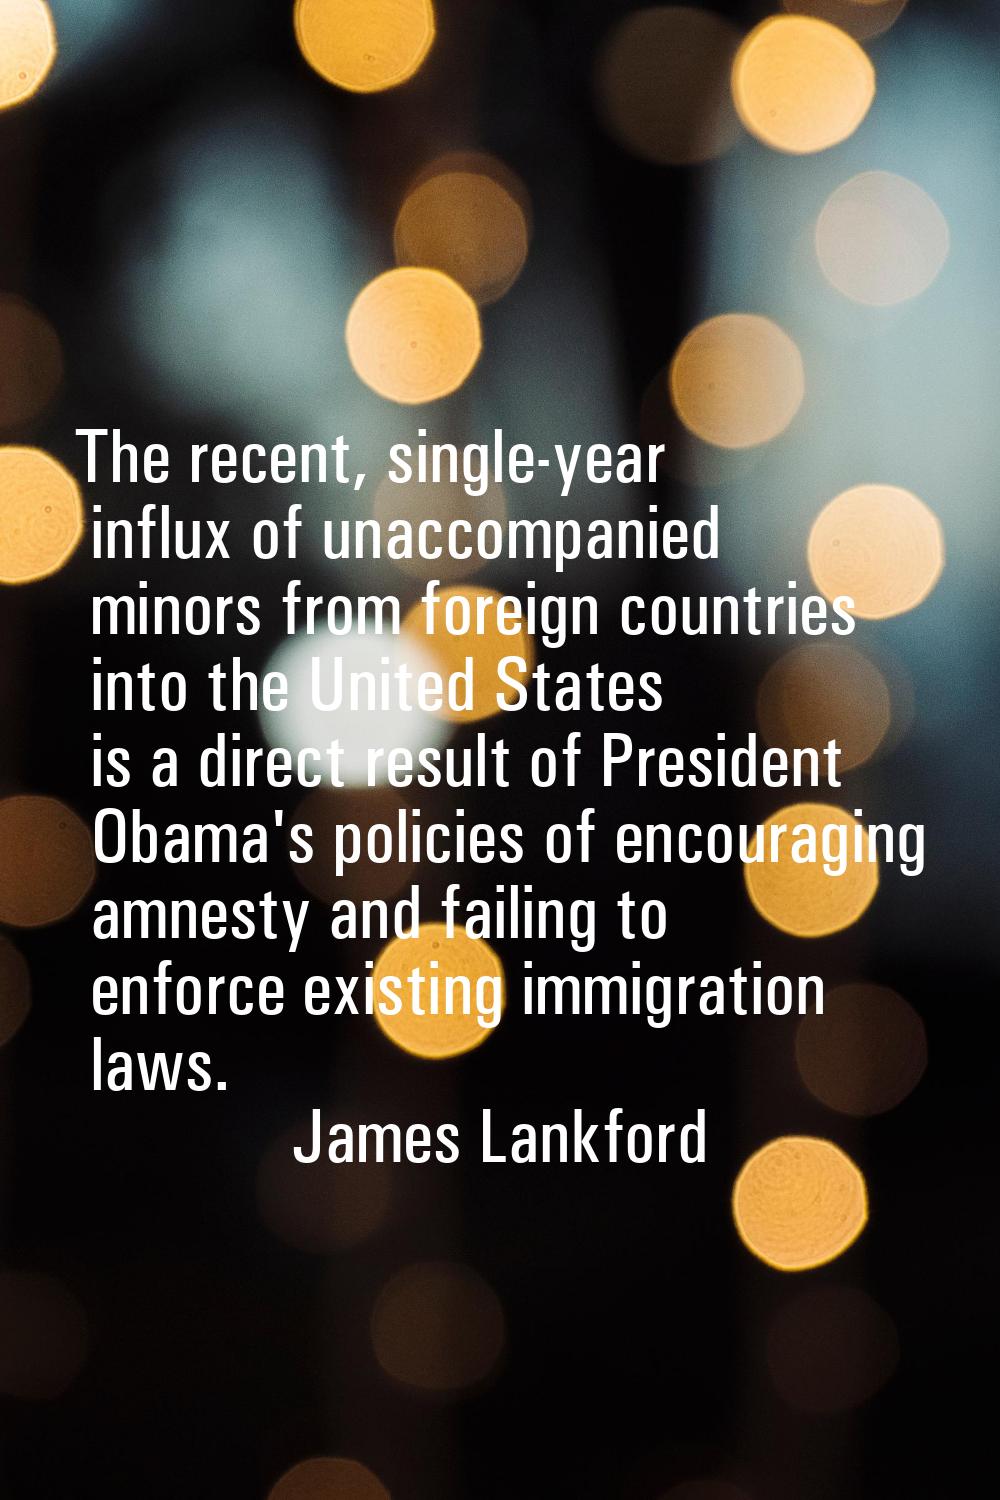 The recent, single-year influx of unaccompanied minors from foreign countries into the United State